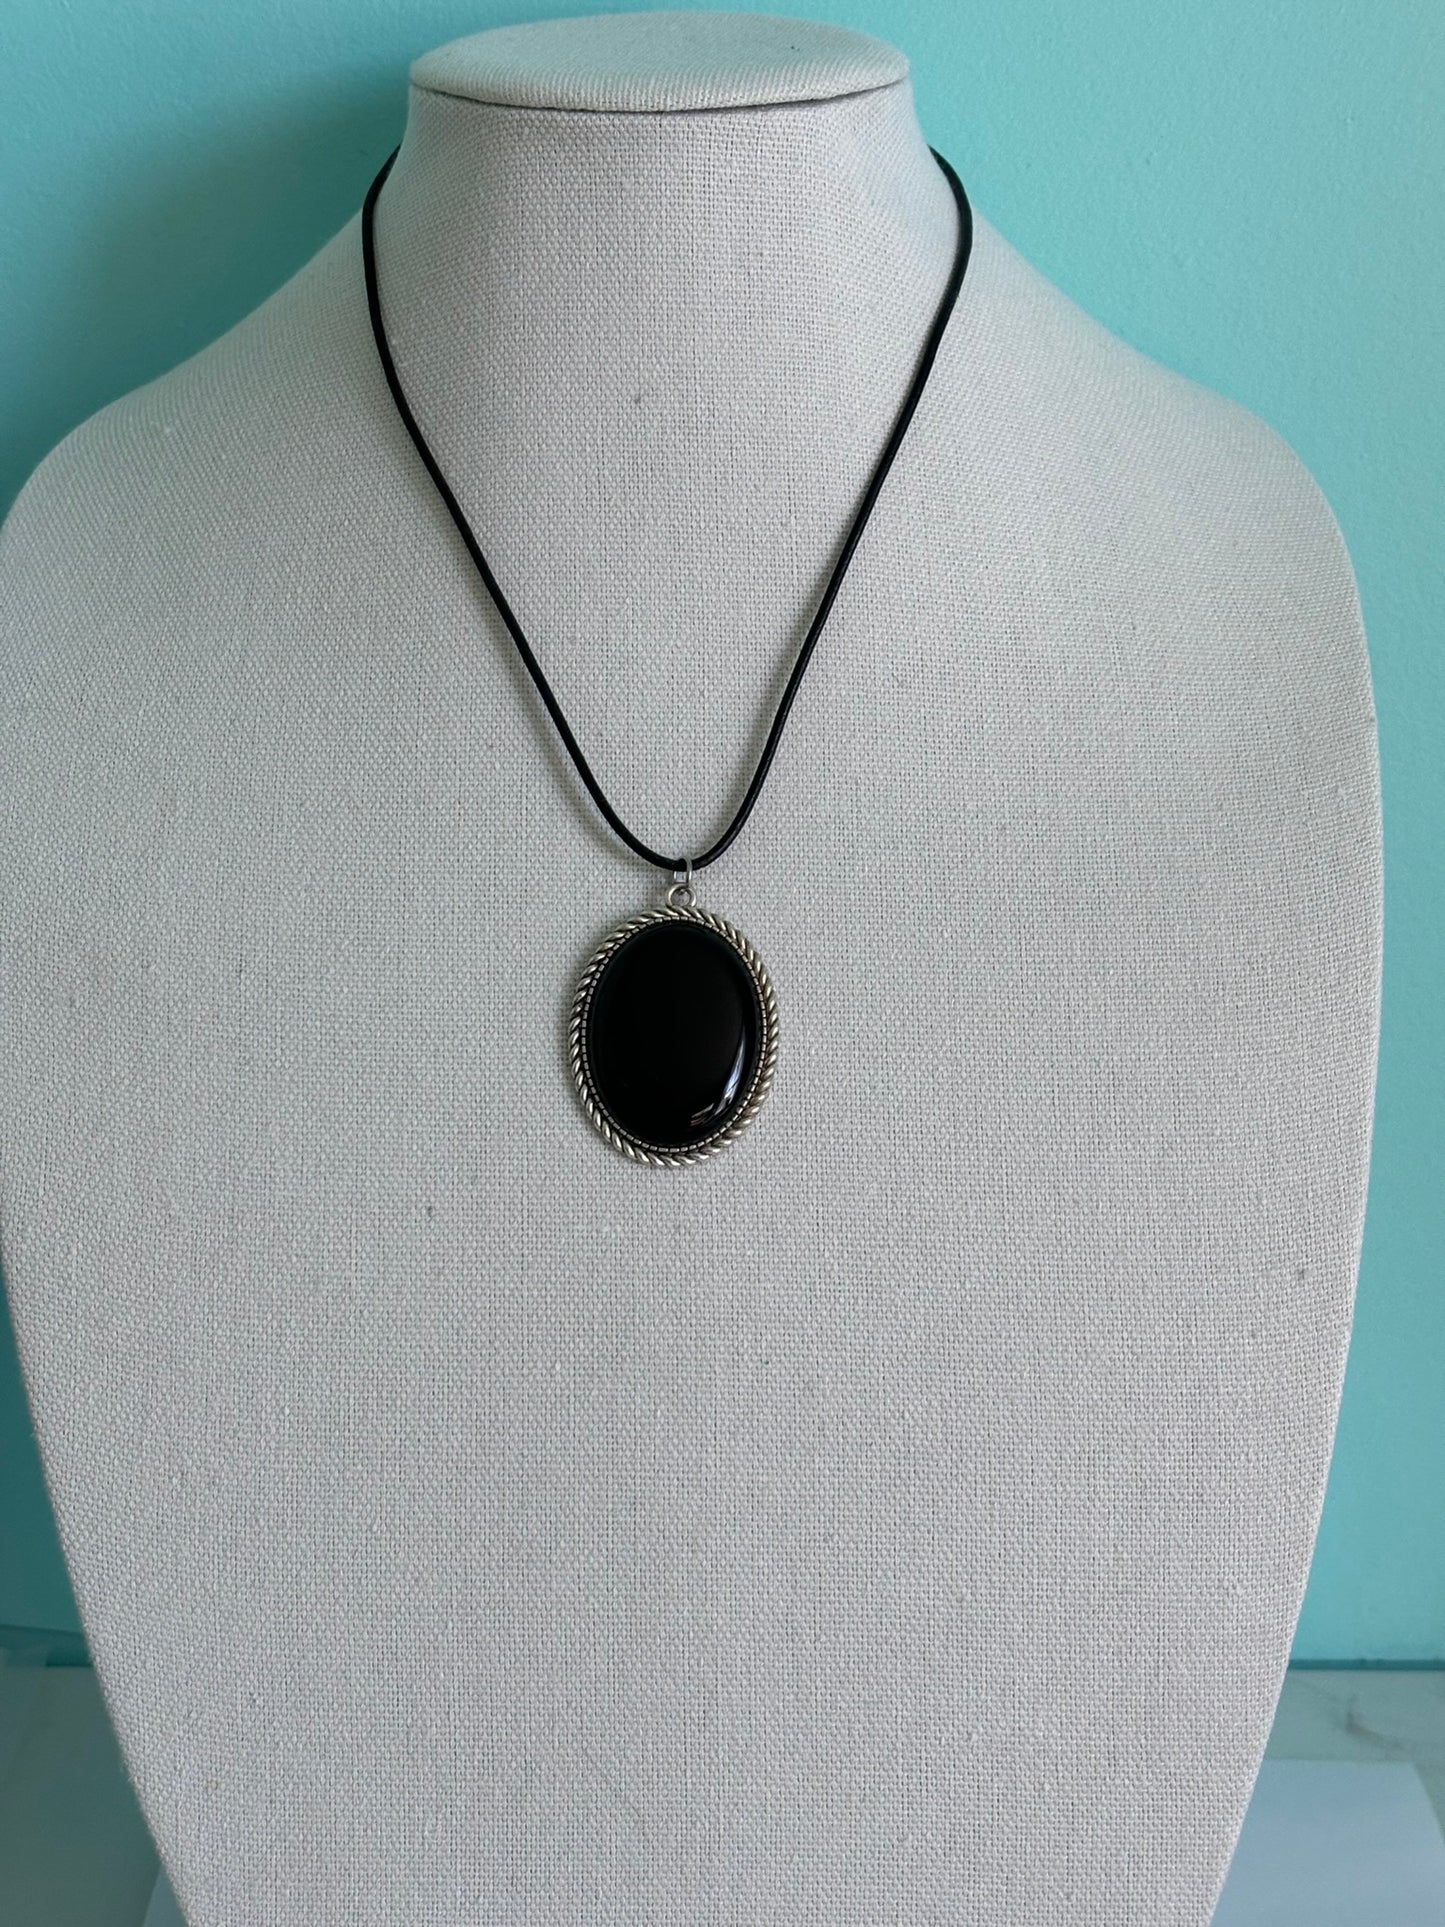 Black Onyx with Rope Braid Pendant Necklace